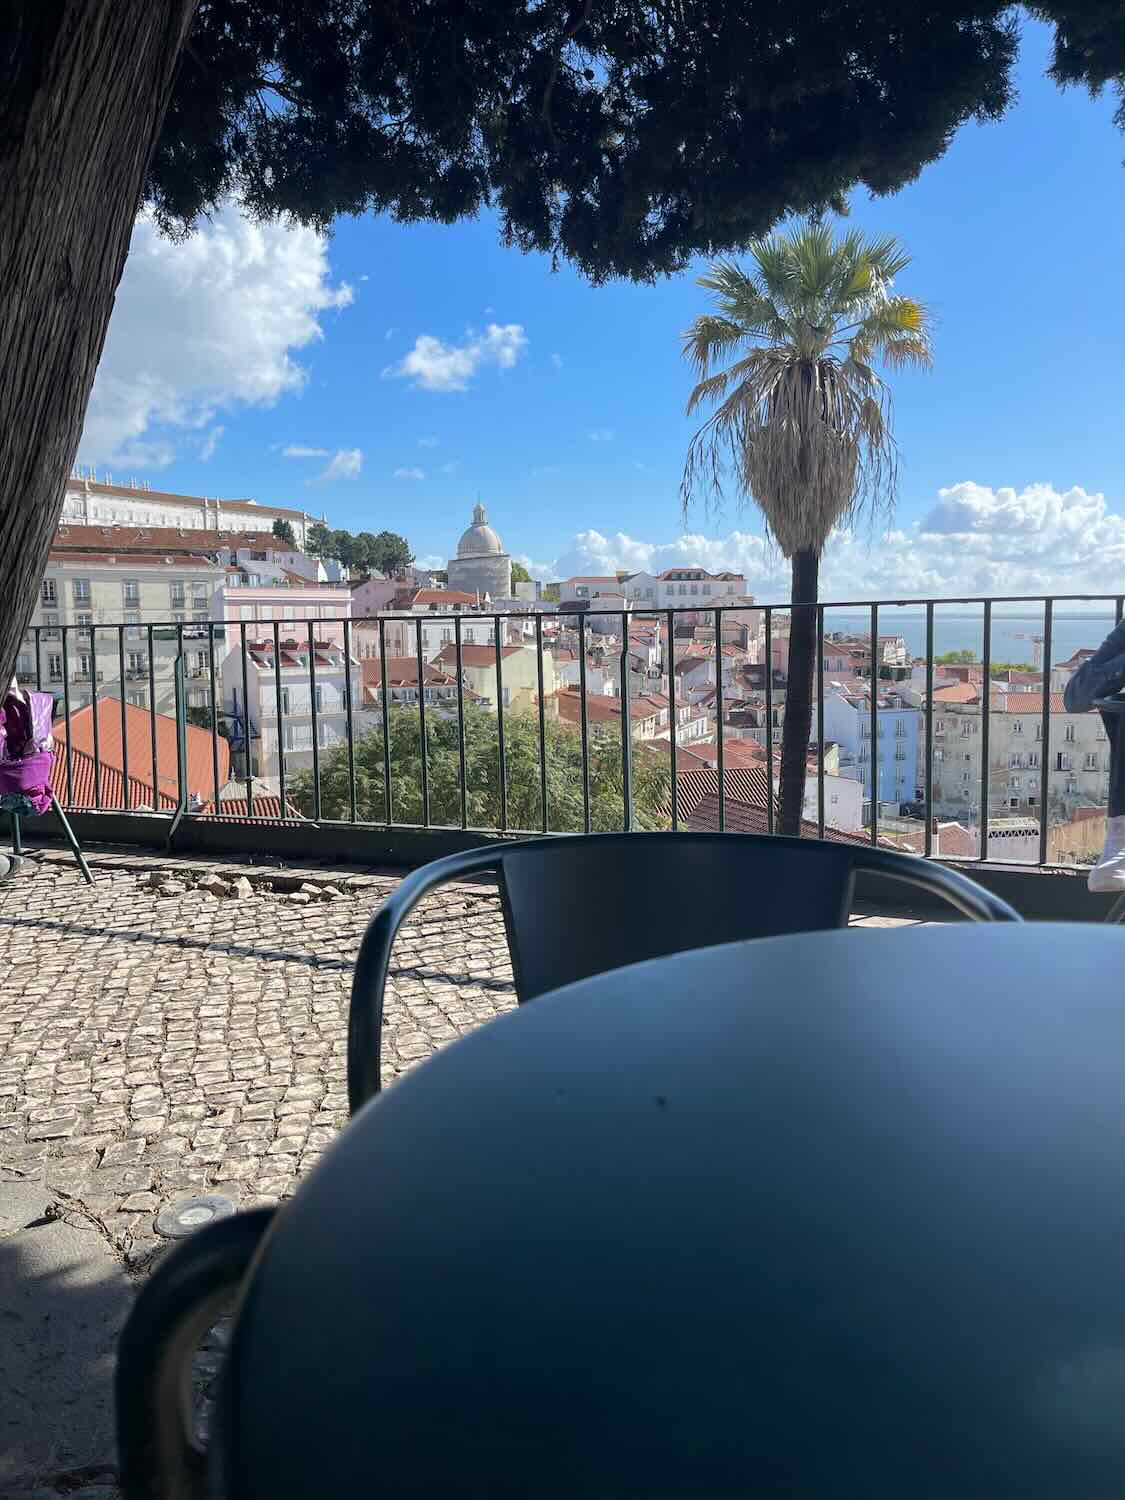 View from a café terrace in Lisbon with a foreground of a table and chair, offering a serene vista over the city's red rooftops, with the National Pantheon's dome prominent in the background, under a sunny sky with fluffy clouds.